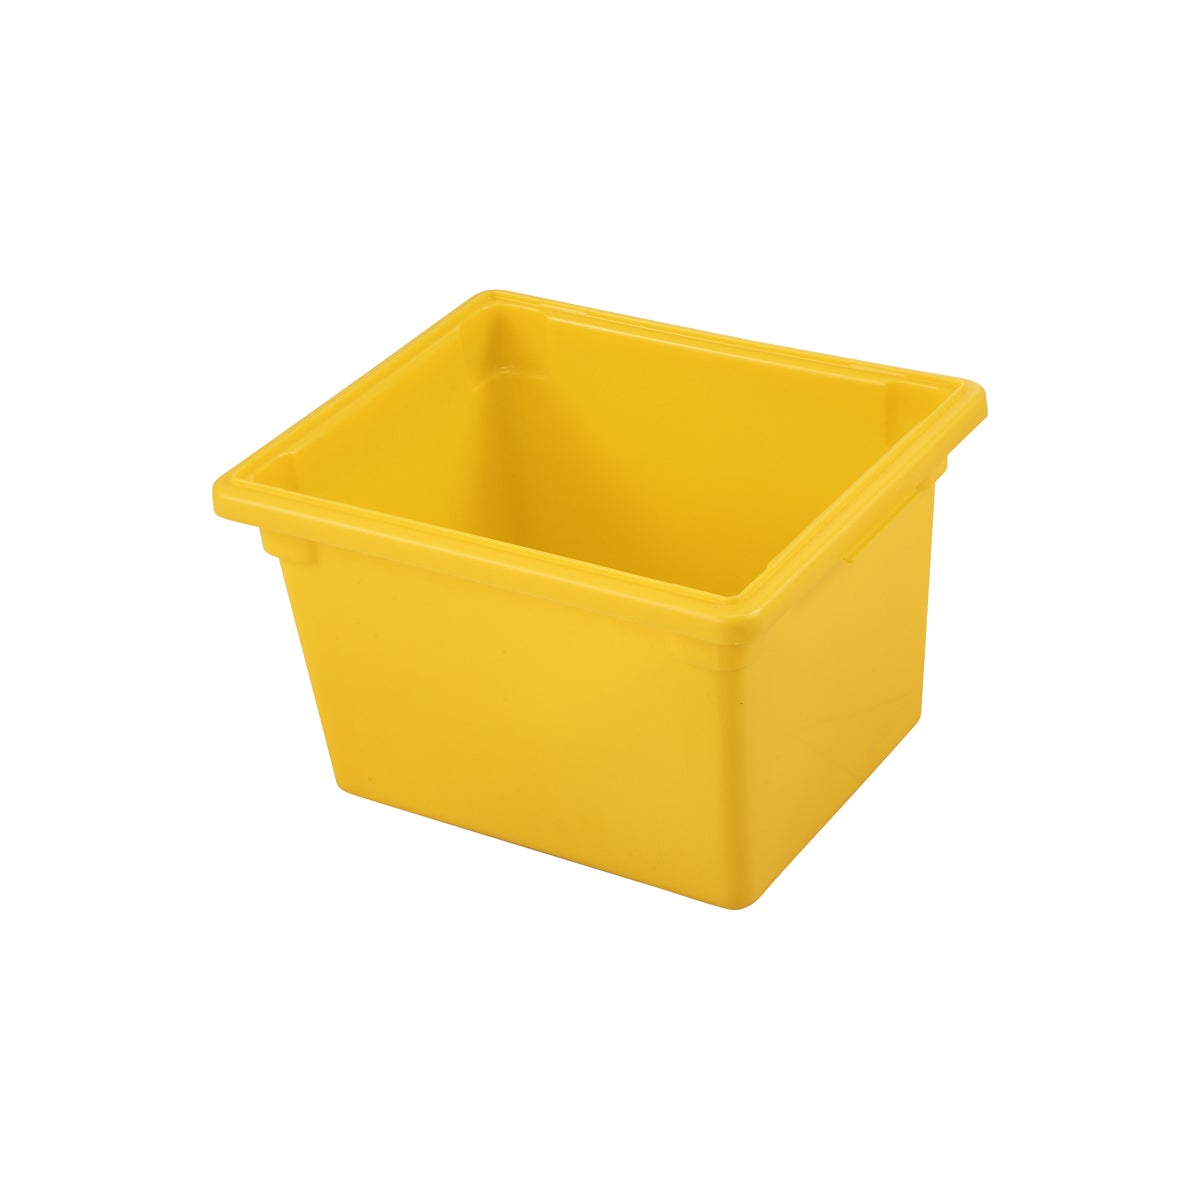 JW-SB30 Jiwins Container / Orangiser for Cleaning Cart Yellow 29.39Lt Tomkin Australia Hospitality Supplies